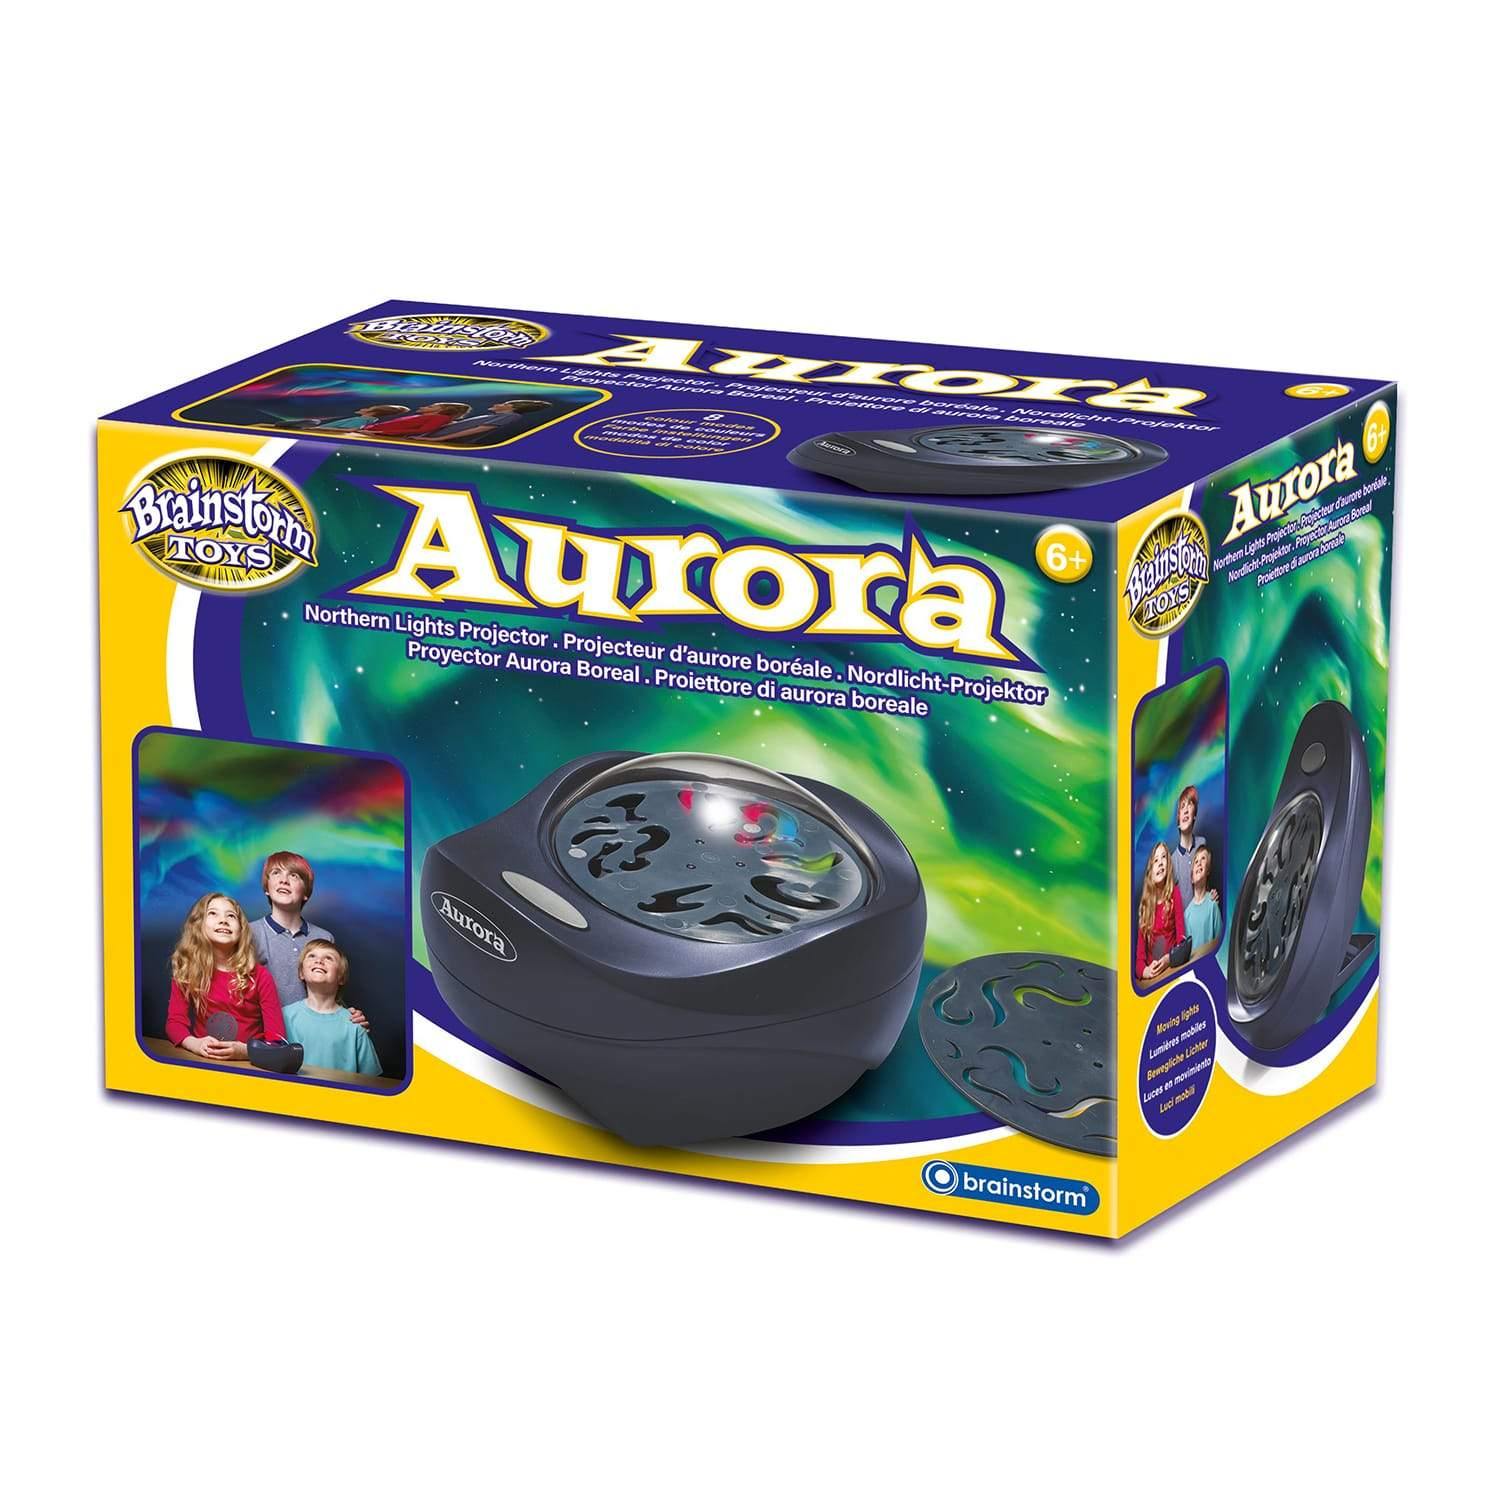 Northern lights projector in box